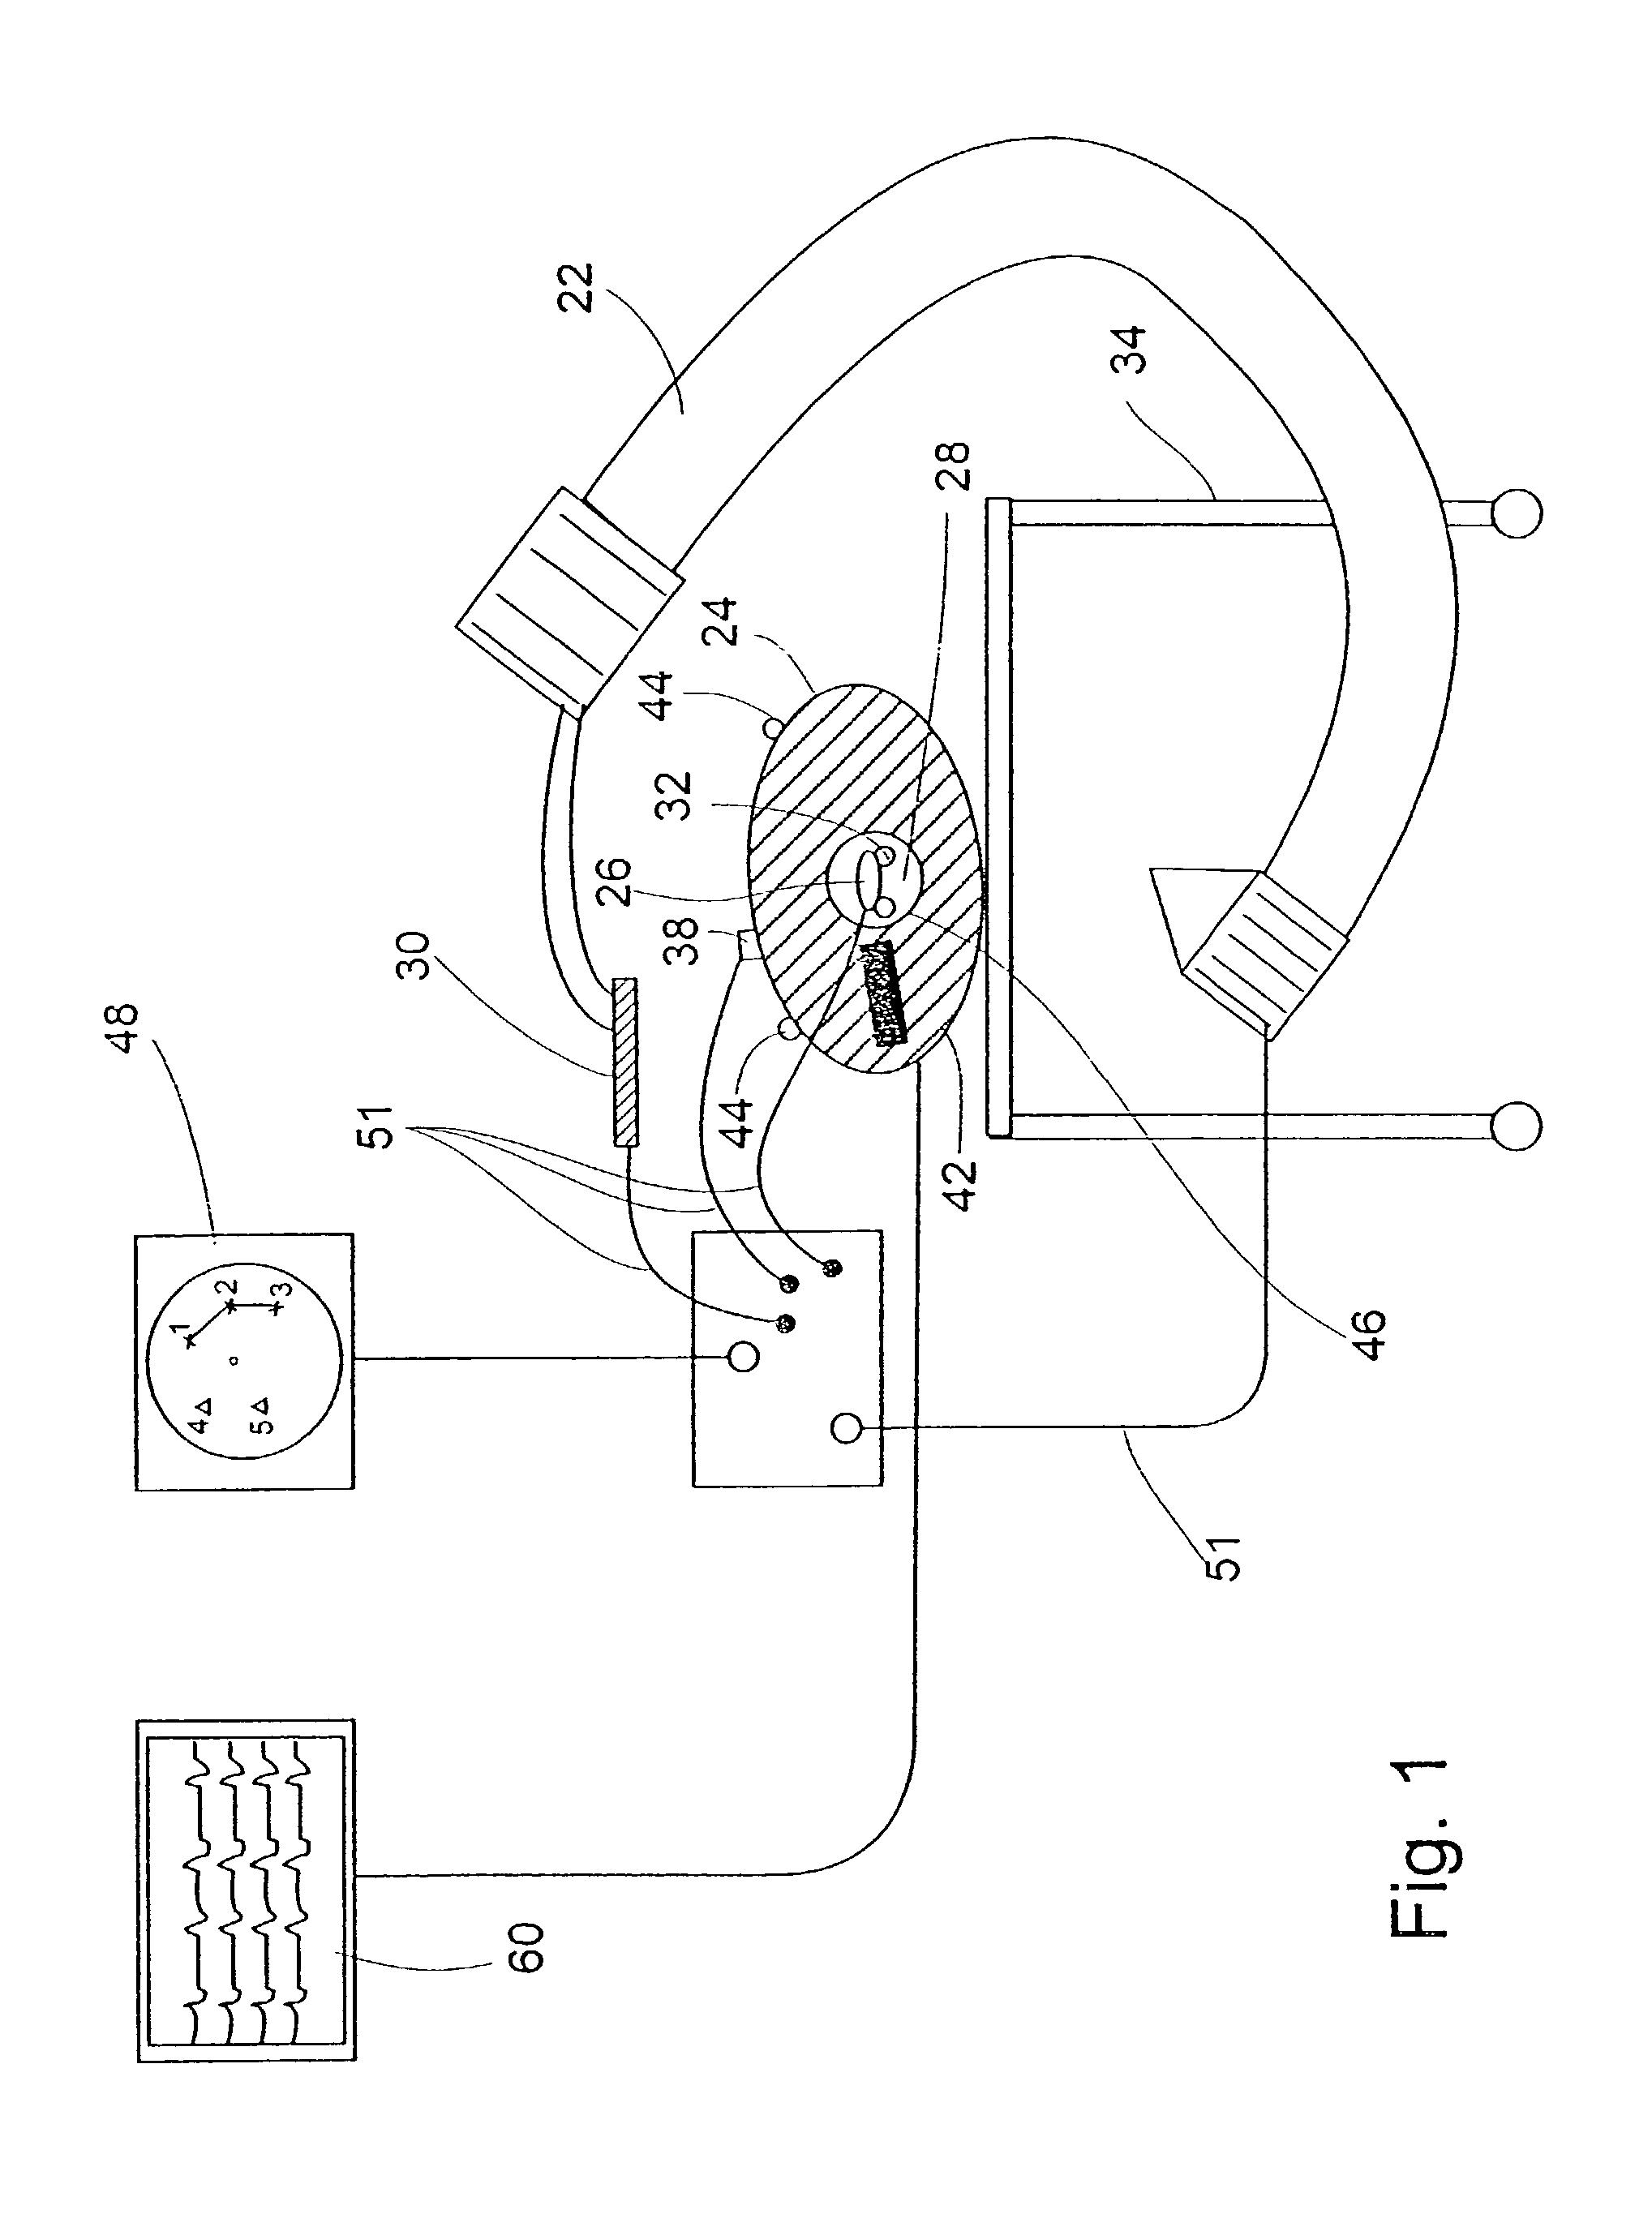 System and method of recording and displaying in context of an image a location of at least one point-of-interest in a body during an intra-body medical procedure